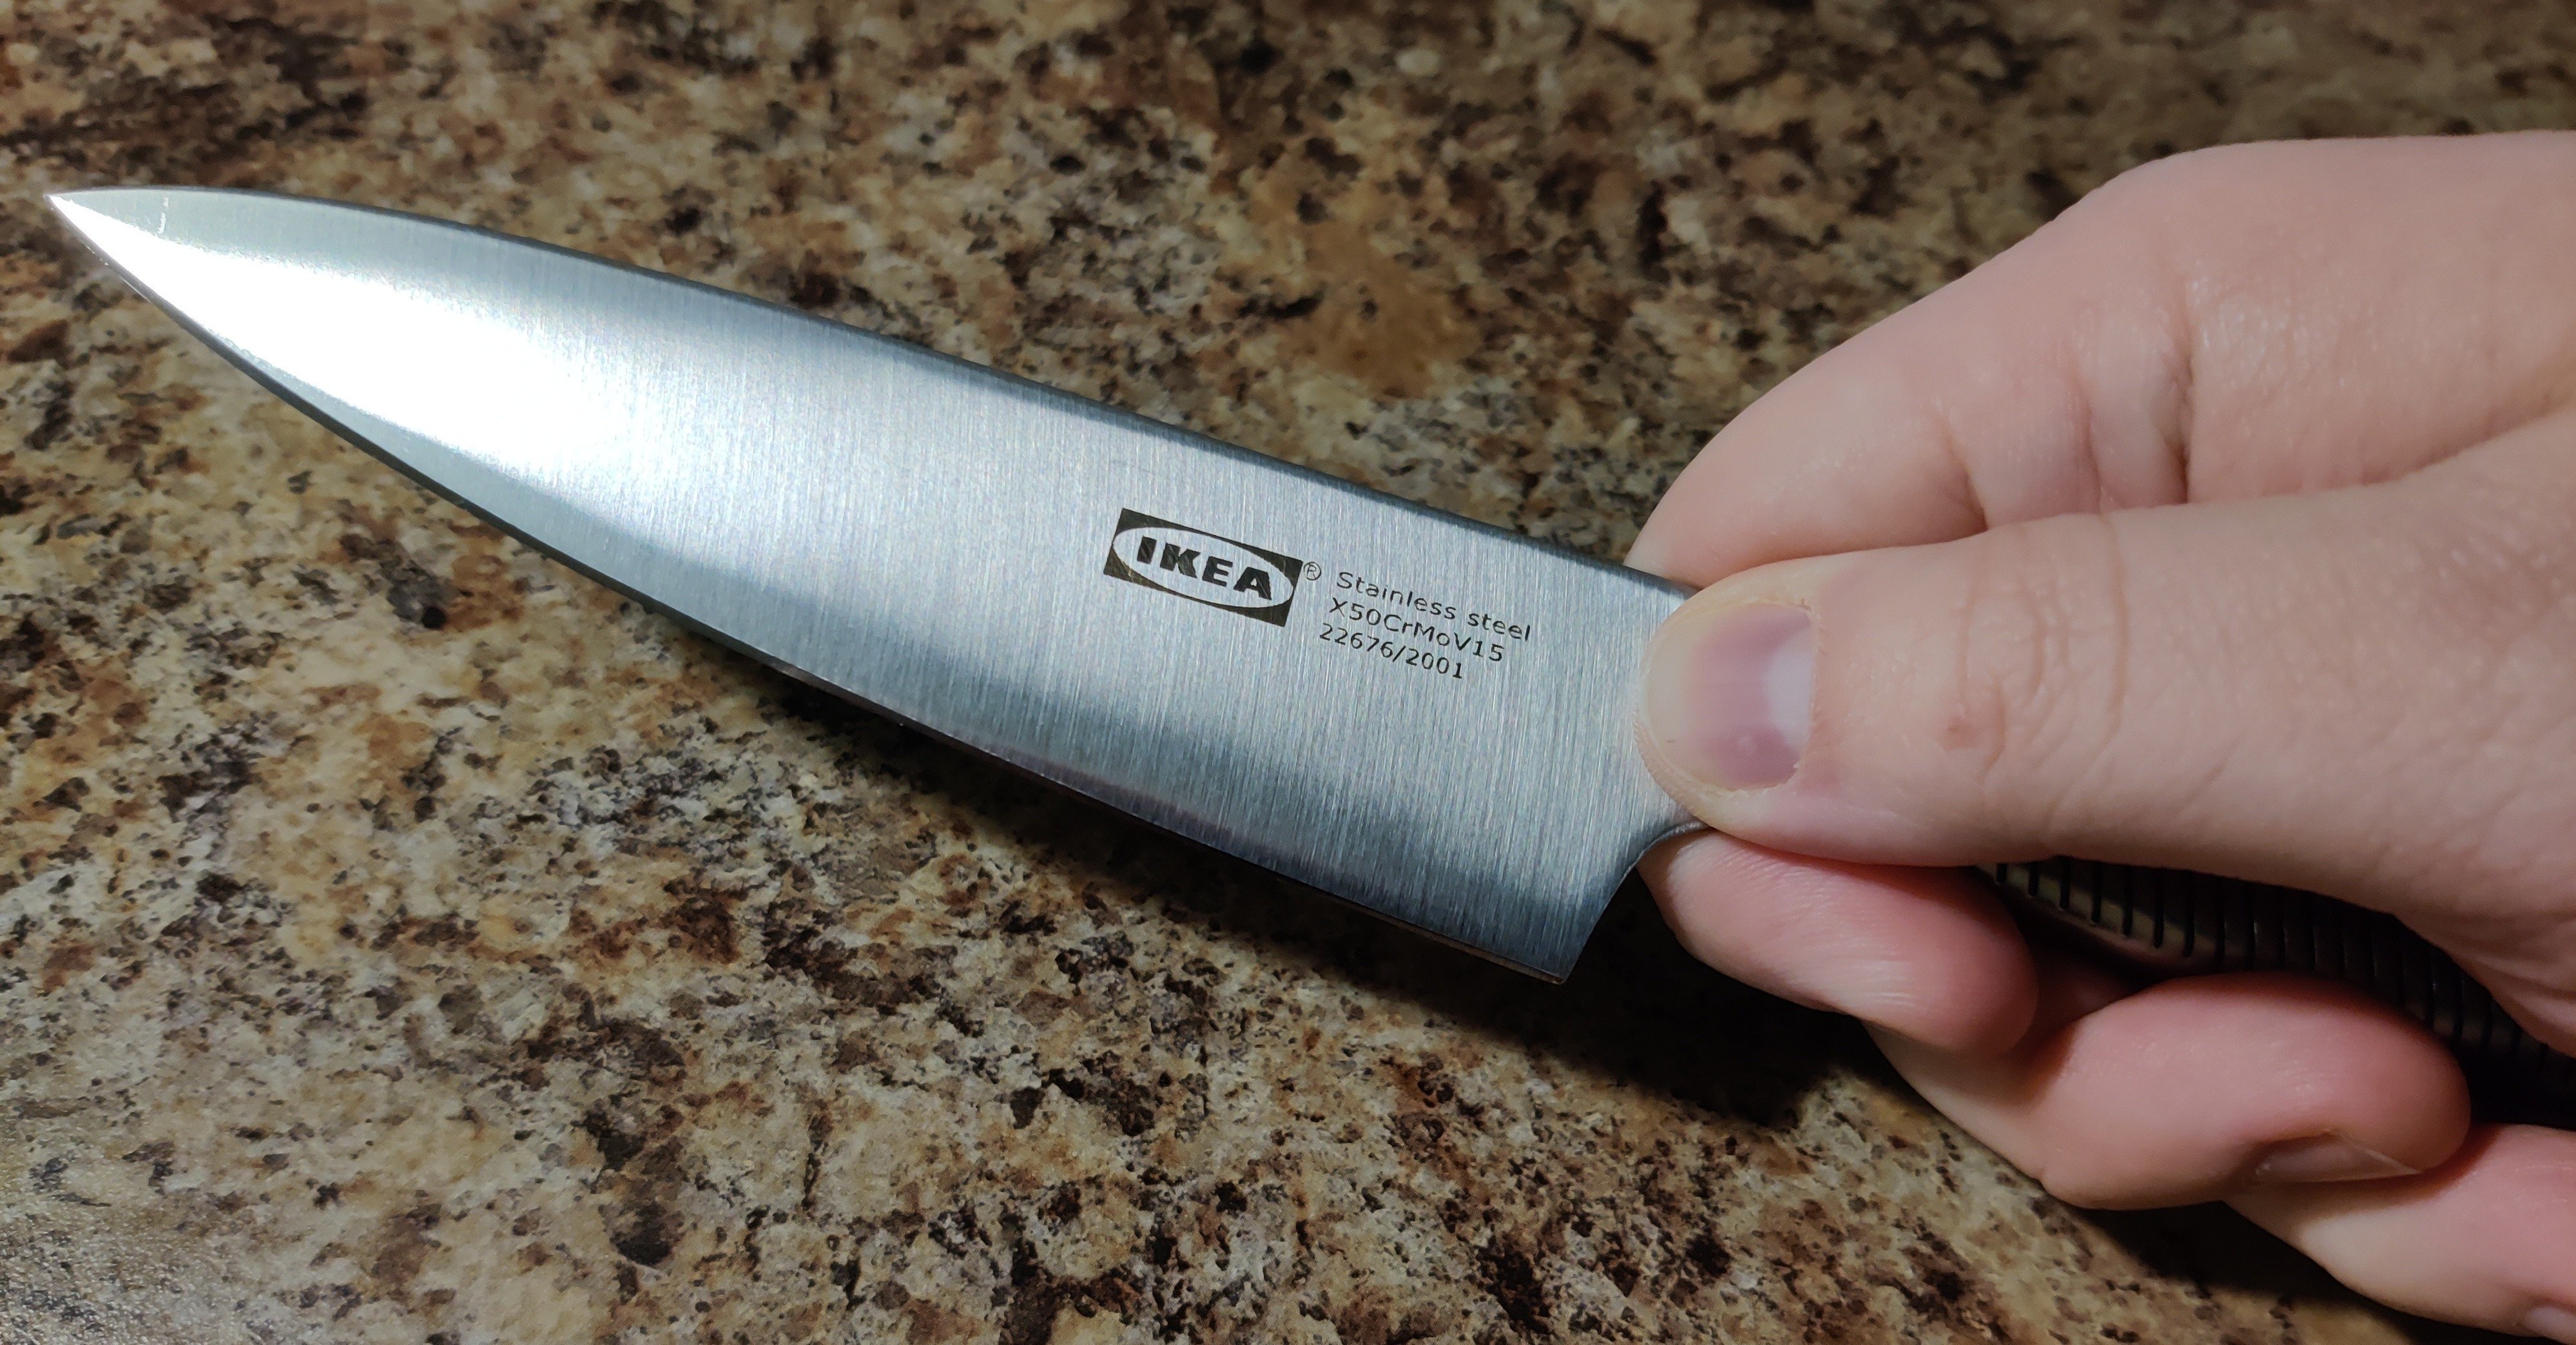 A small, stainless steel IKEA utility knife being held between thumb and forefinger